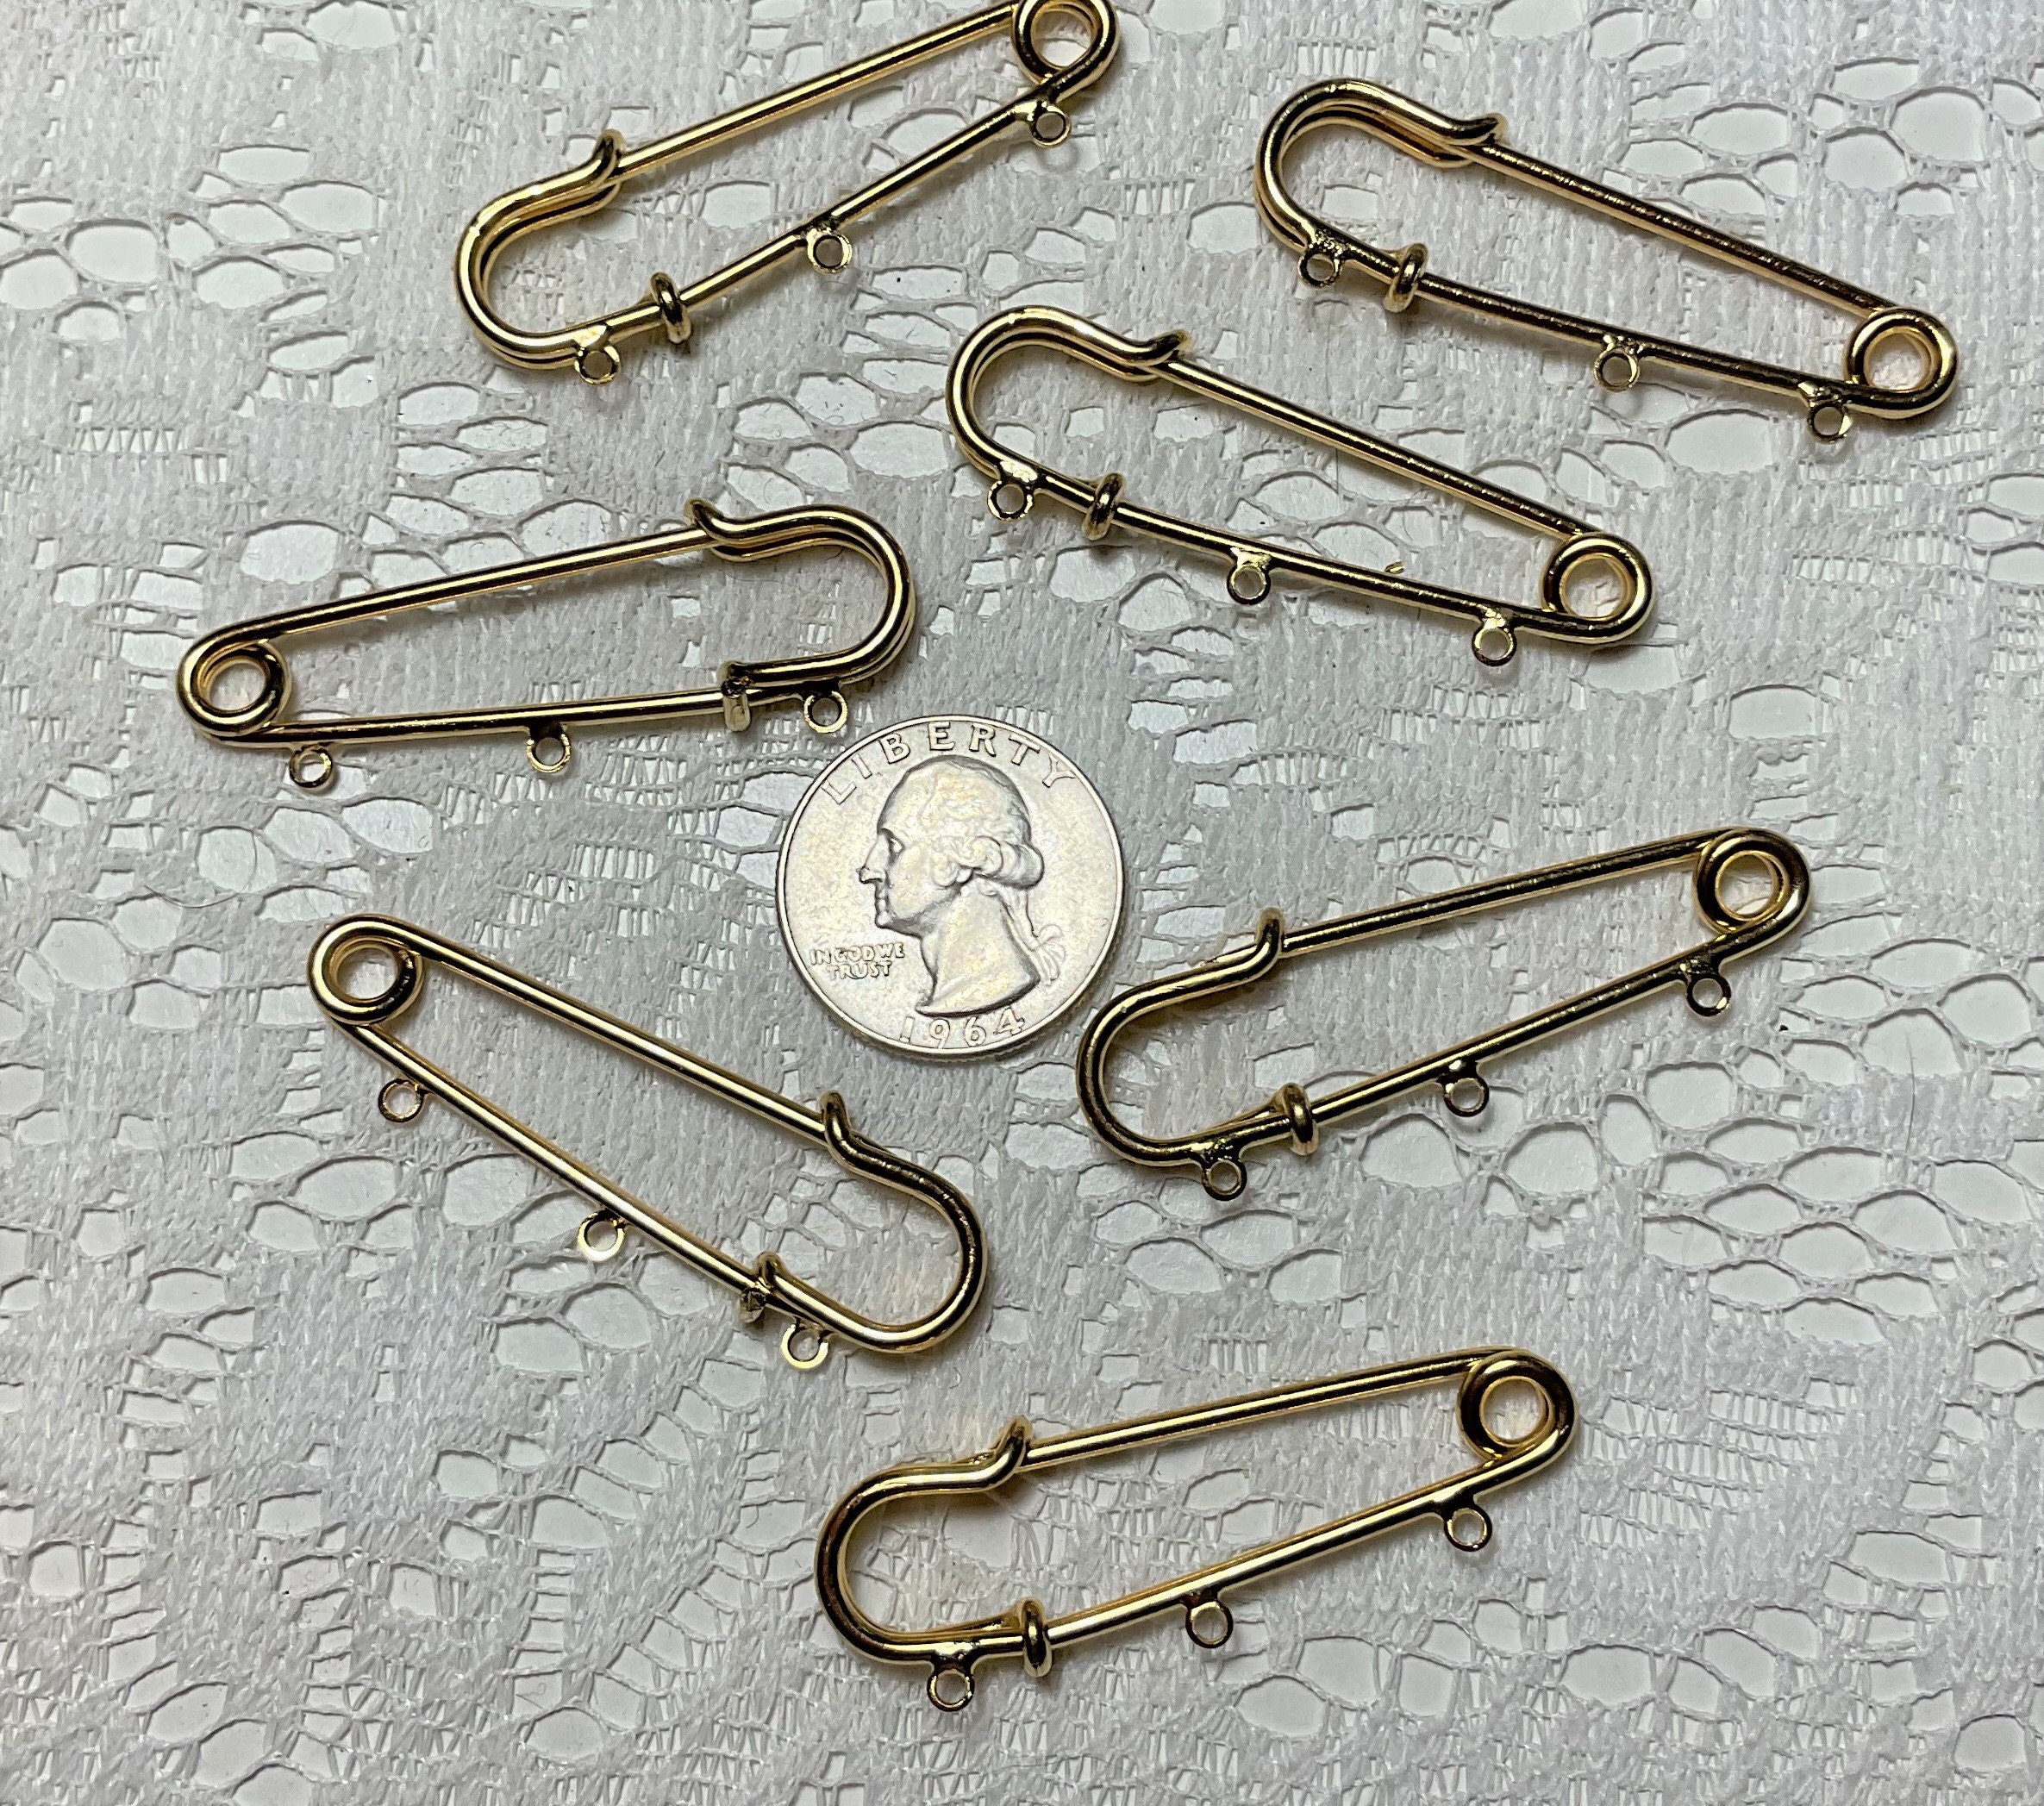 Tool Gadget Large Safety Pins, 3inch Safety Pins, 2PCS Stainless Steel  Safety Pins Large, Silver Huge Strong Safety Pins, Extra Large Laundry Pins  for Blankets 